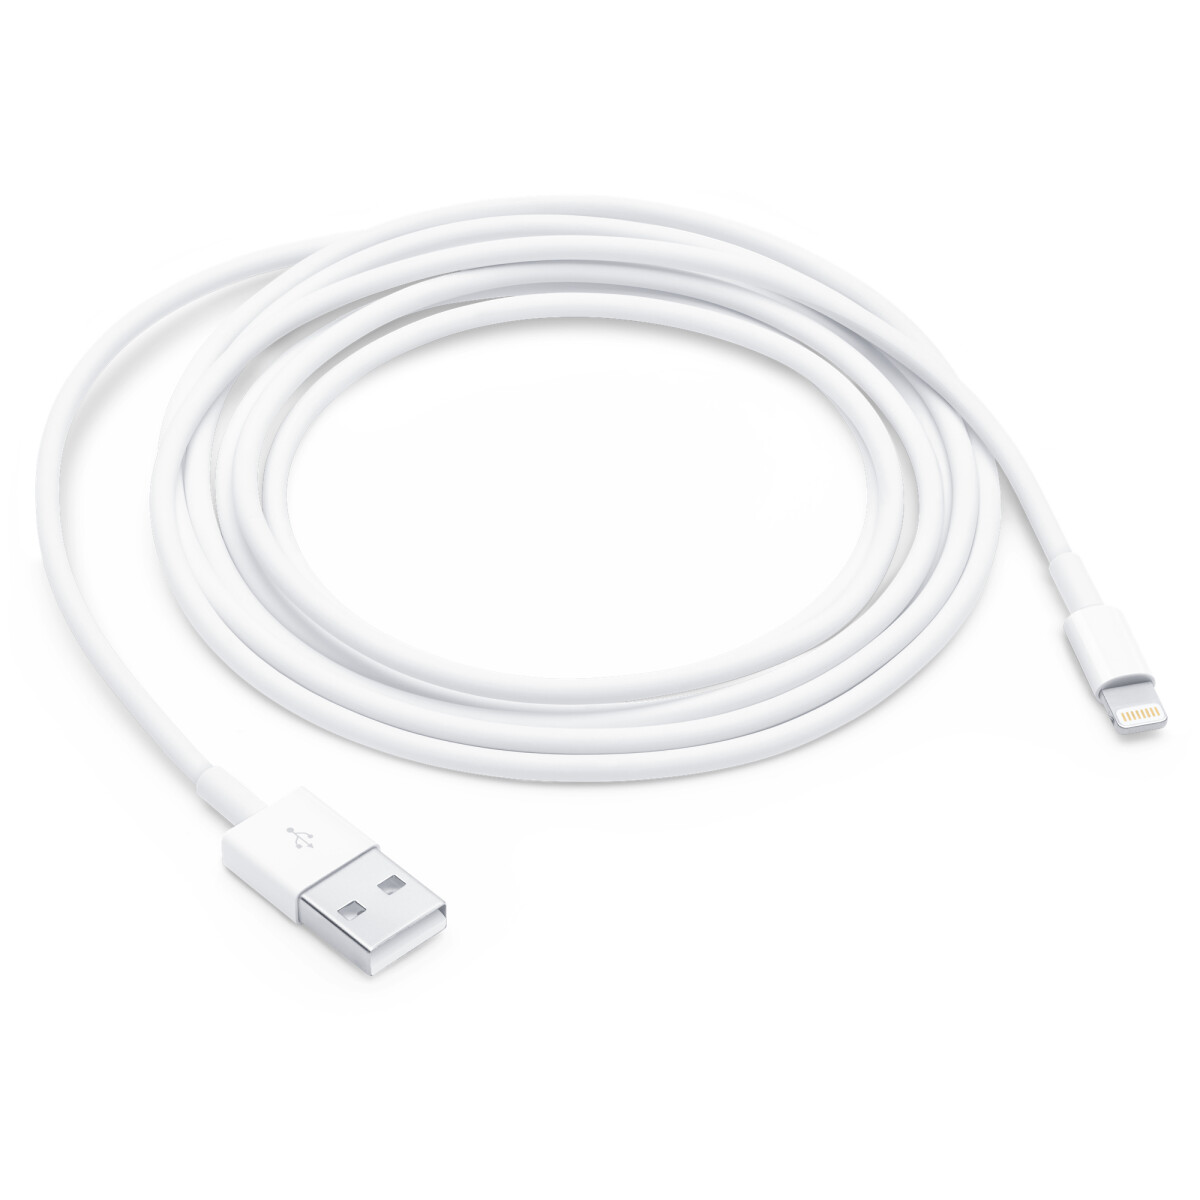 Cable Lightning to USB Cable 2m 